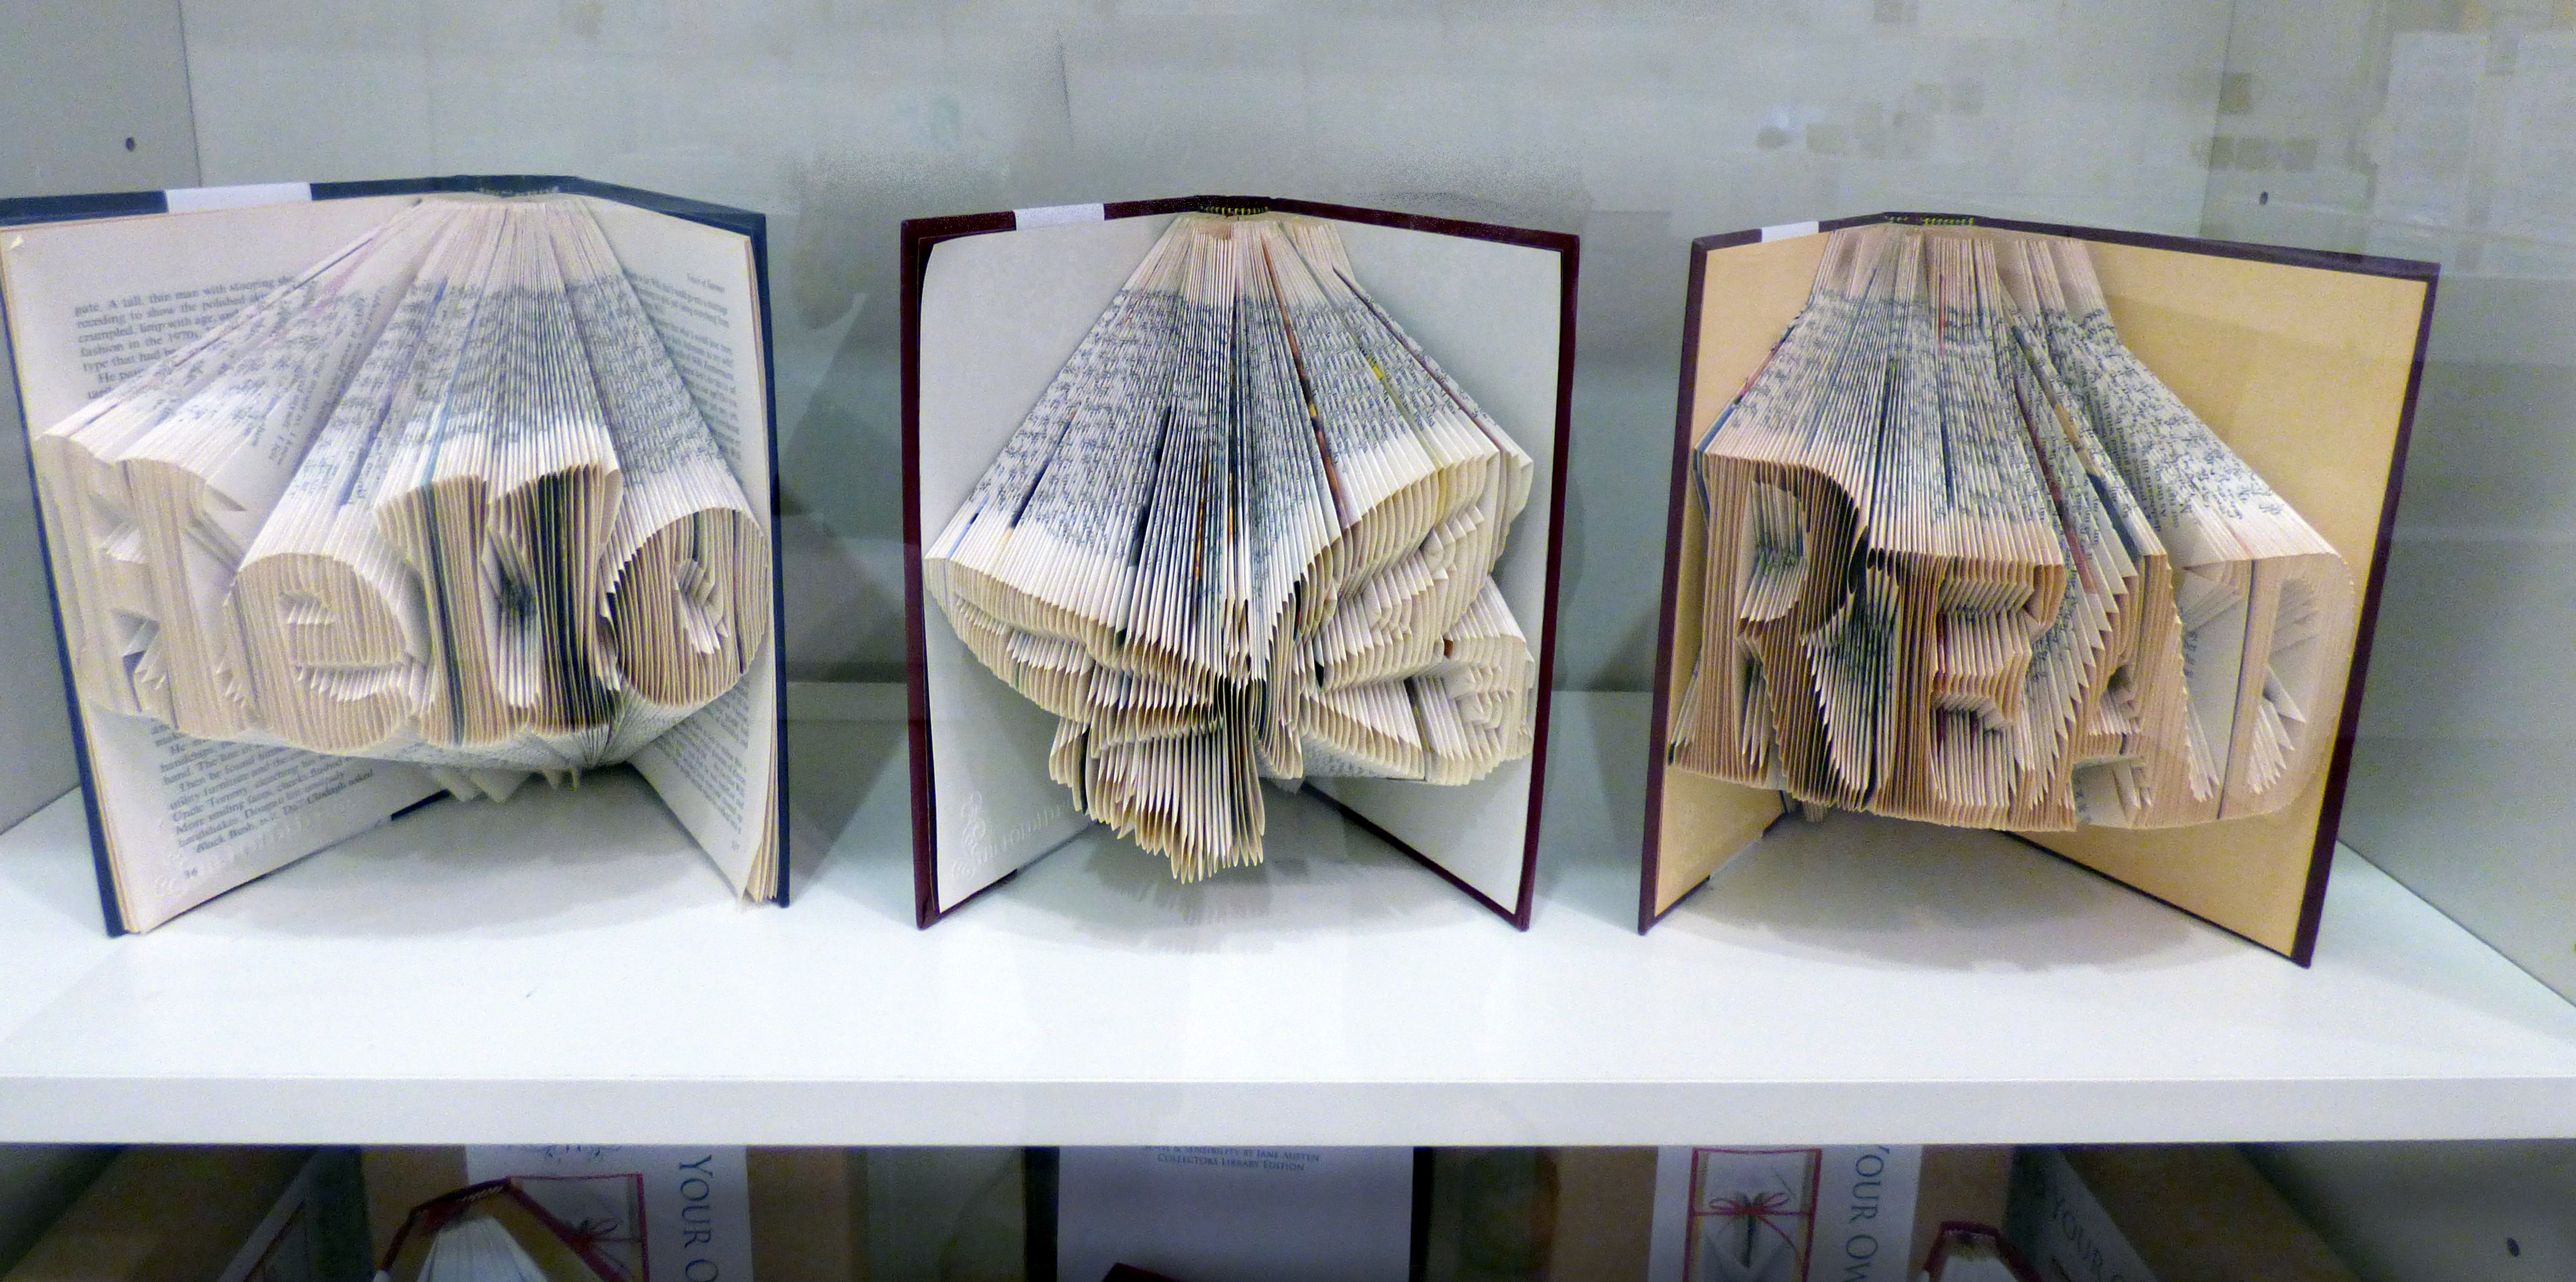 THE FOLDED PAGE by Rosy Hammersley, recycled books, CRAFTED exhibition, Kirkby Gallery, 2016